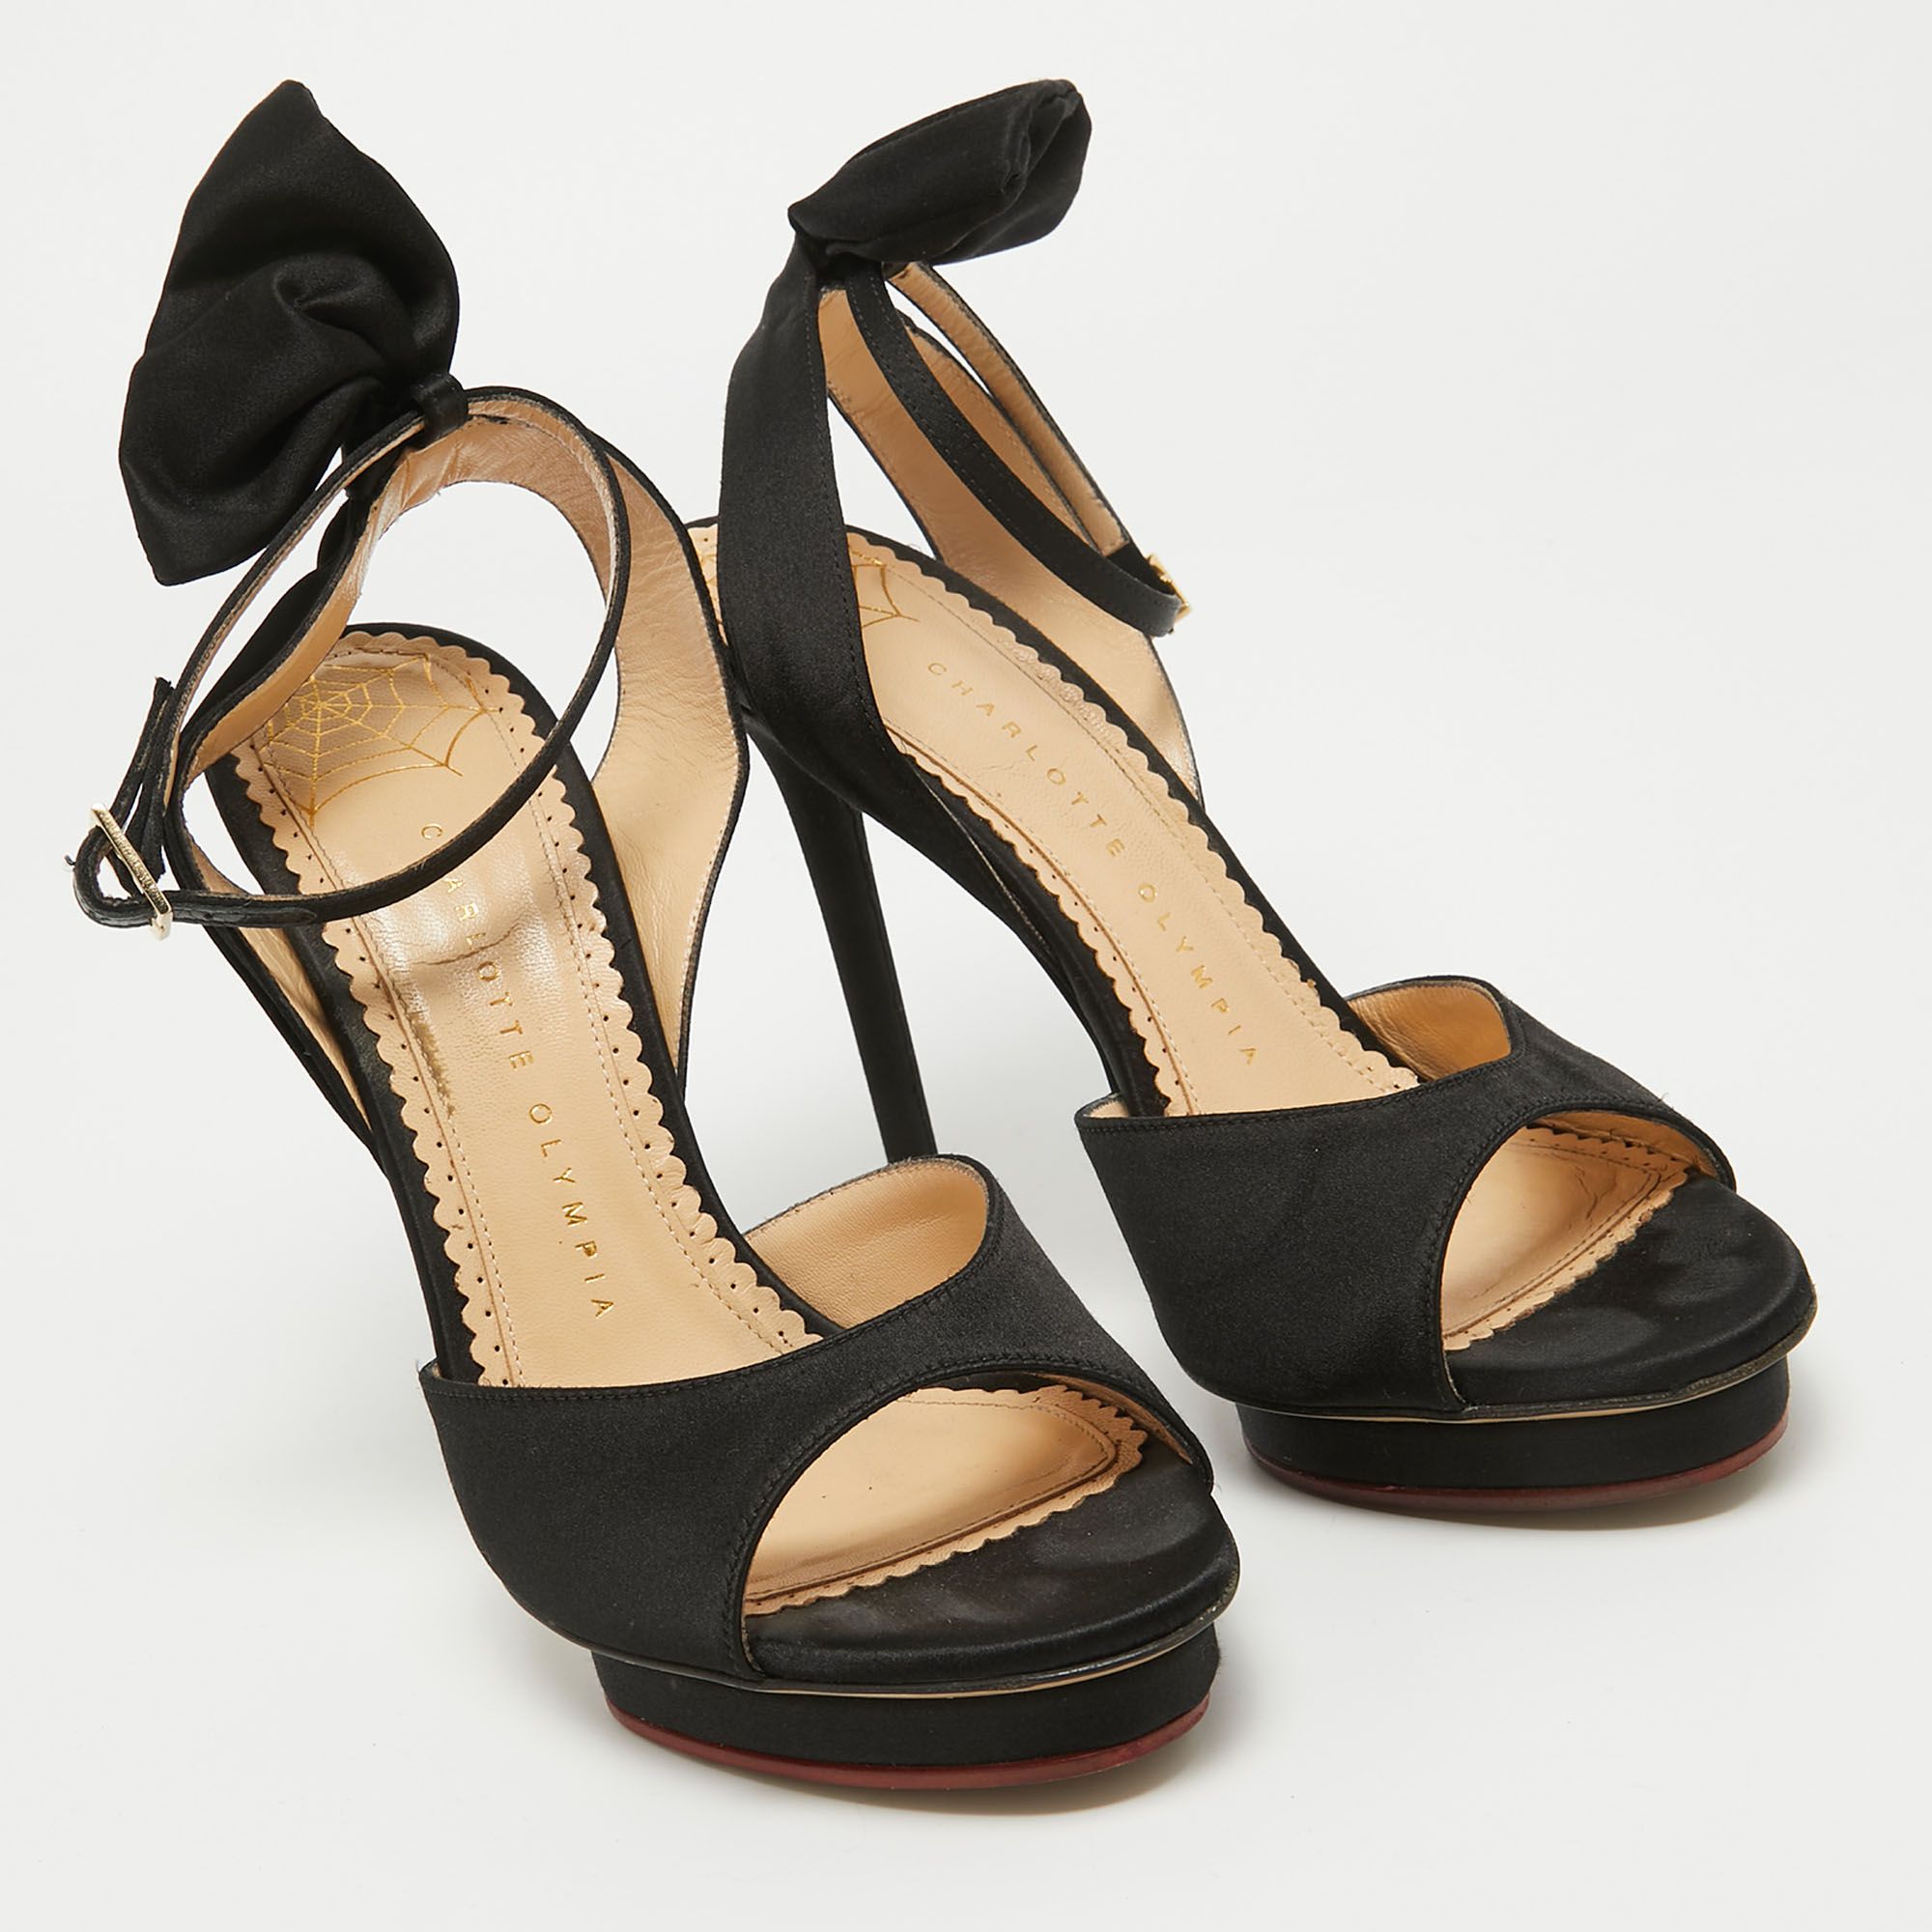 Charlotte Olympia Black Satin Wallace Sandals Size 38